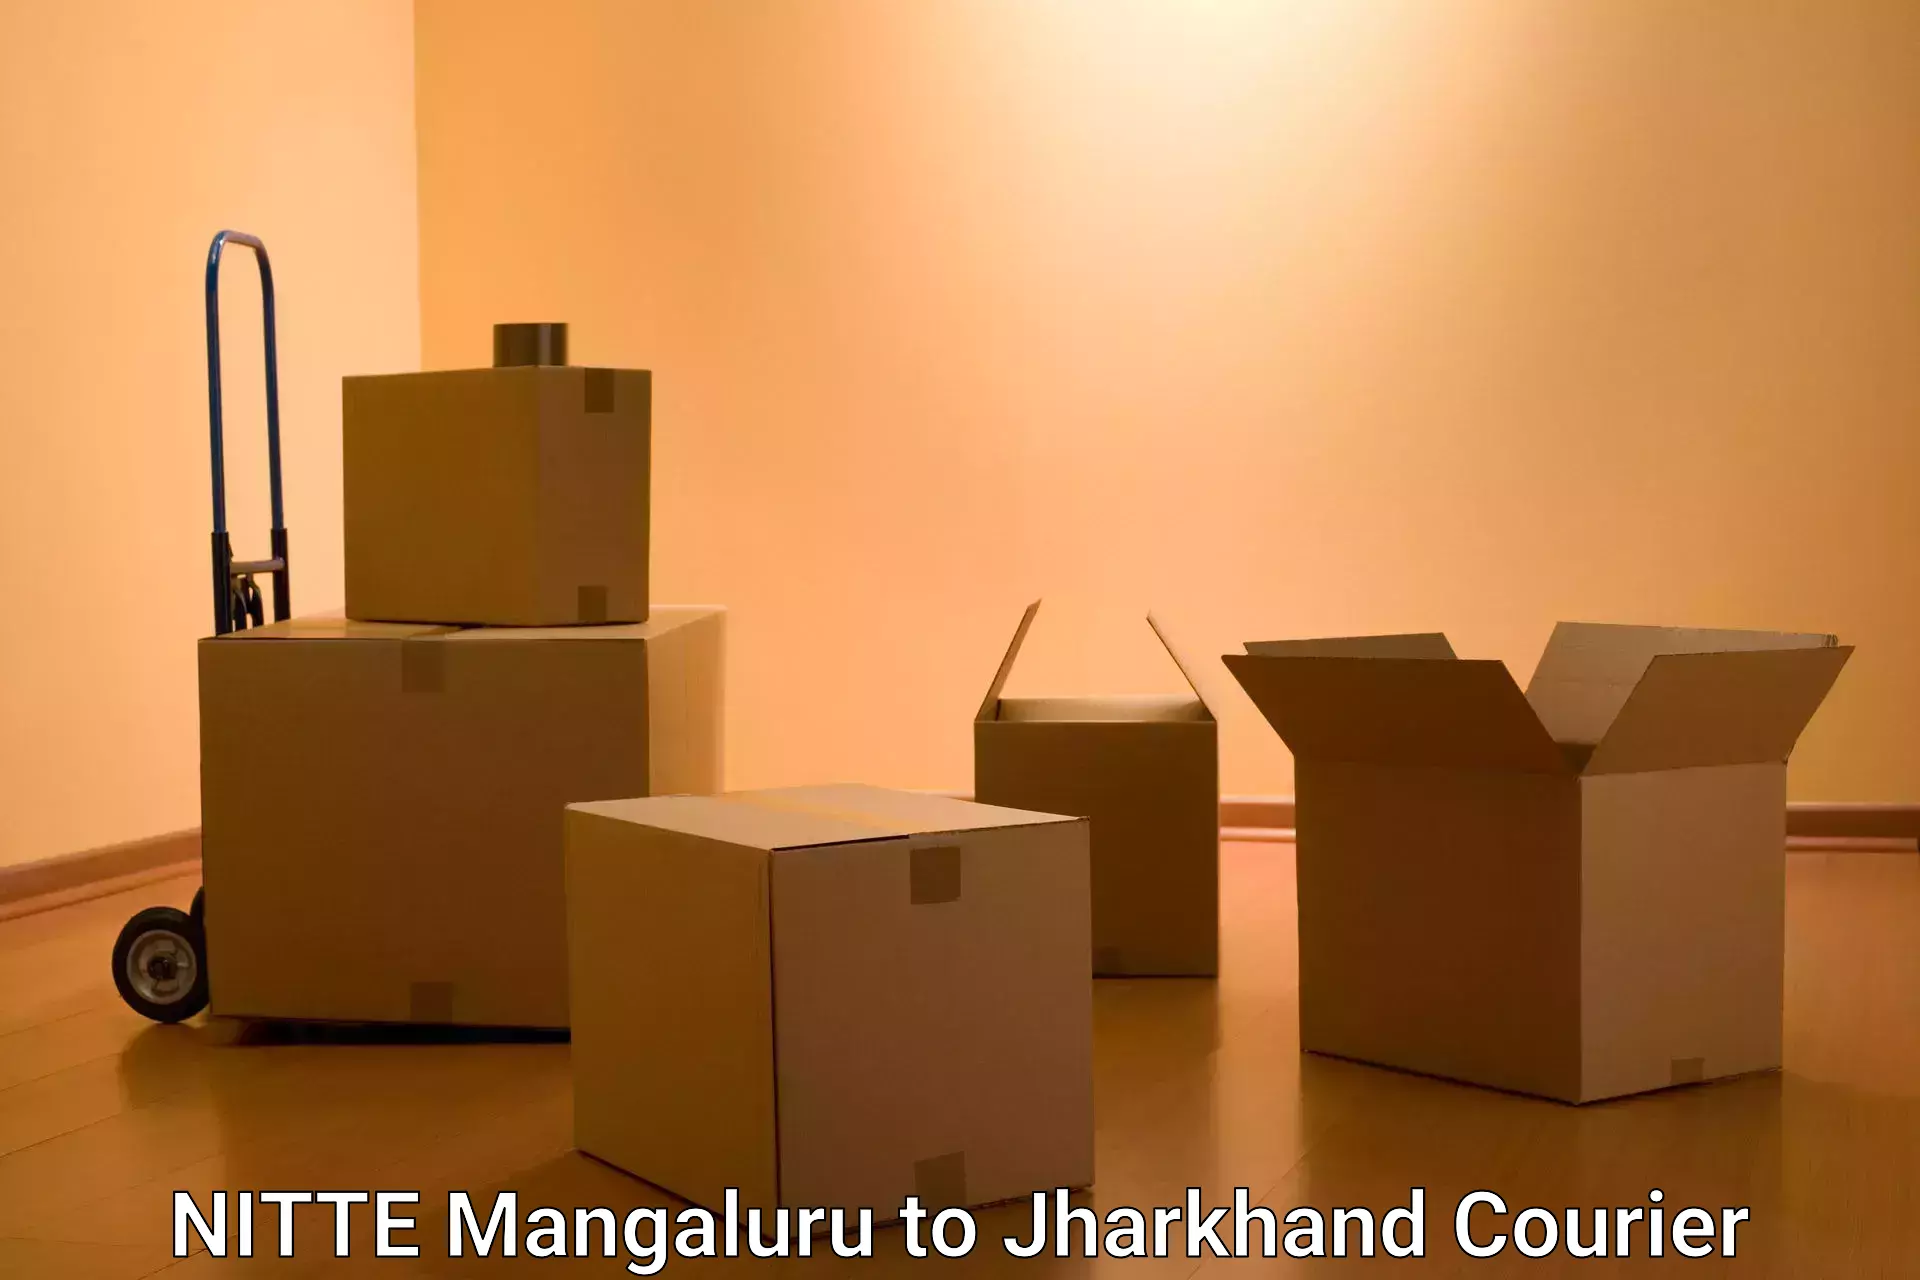 Integrated shipping systems NITTE Mangaluru to Jamshedpur